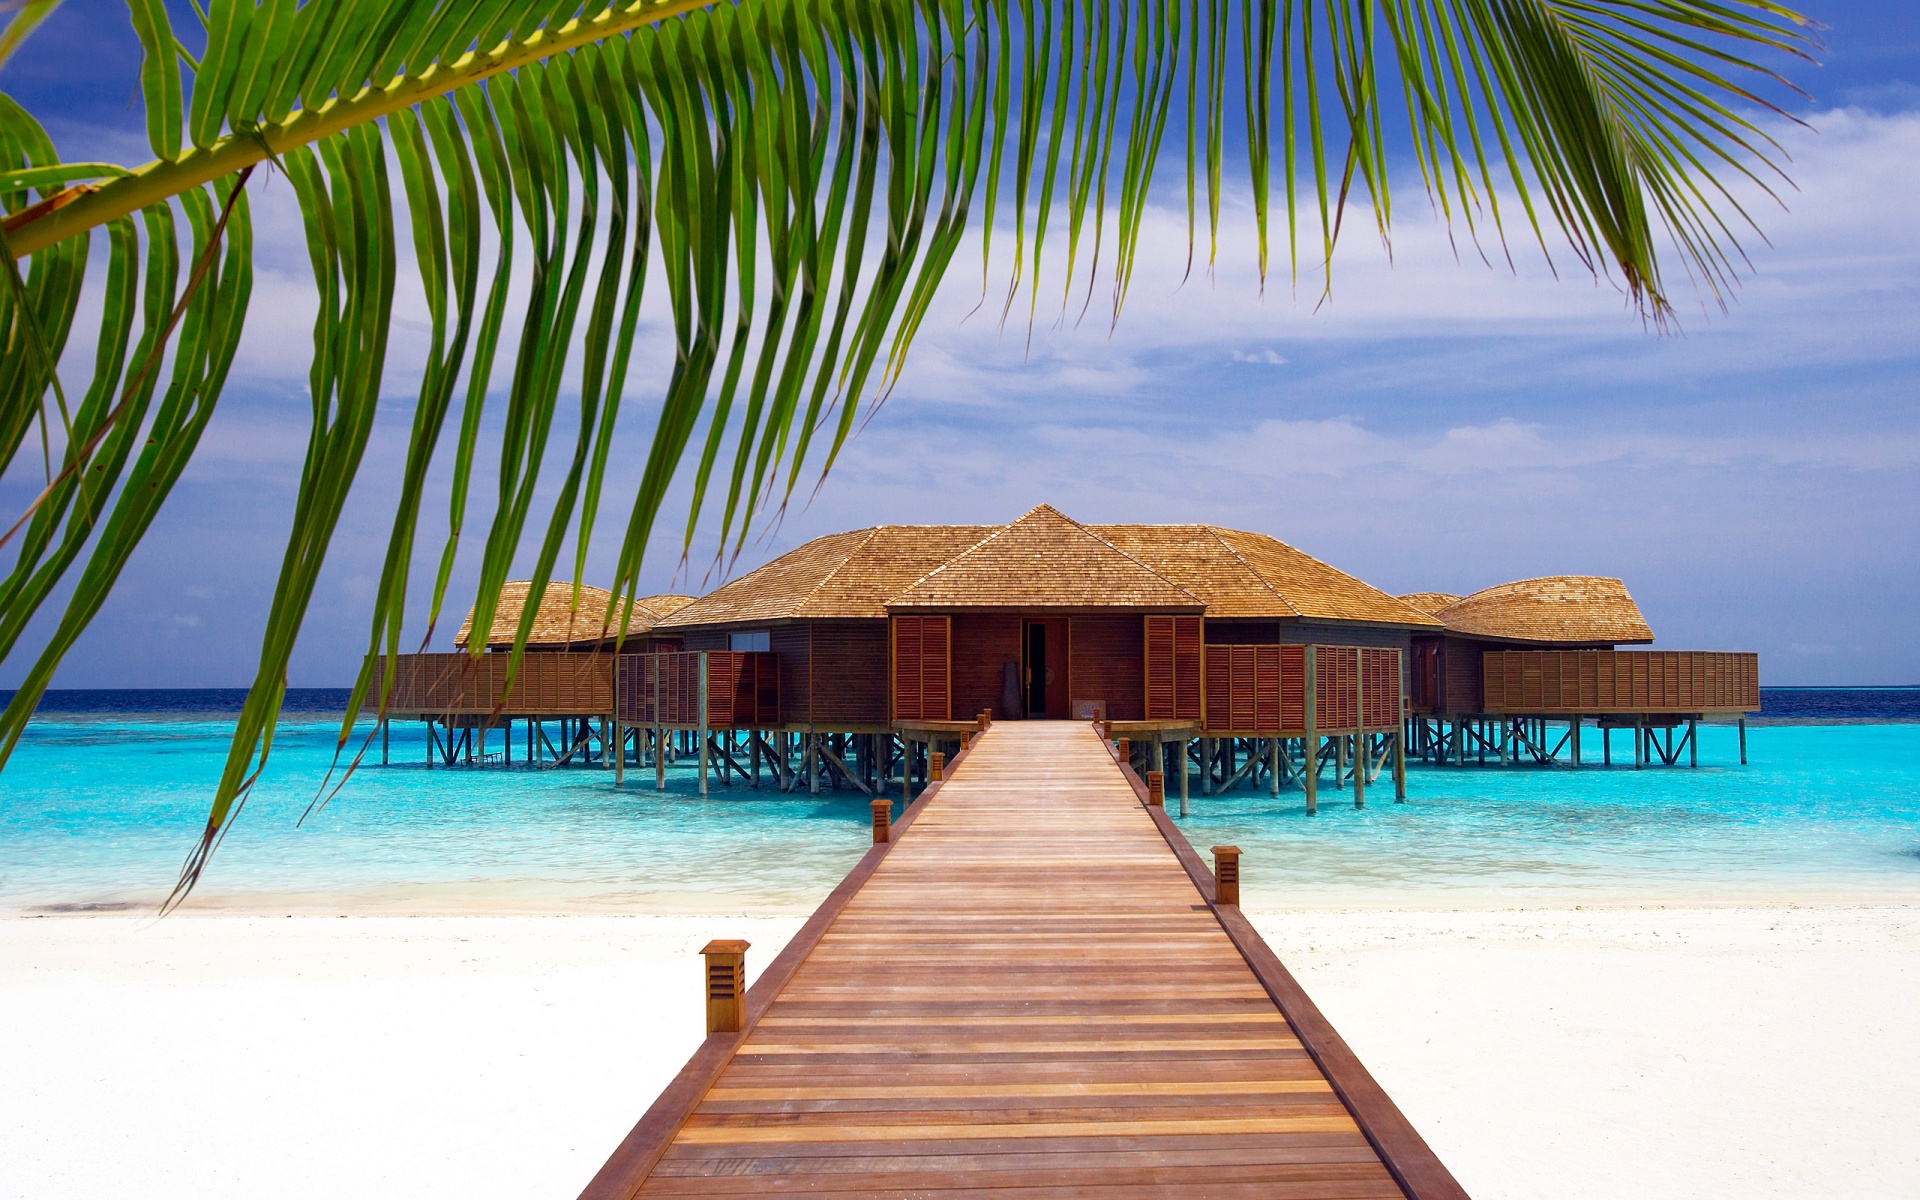 Best Maldives Beach Image Top Collection Bsnscb